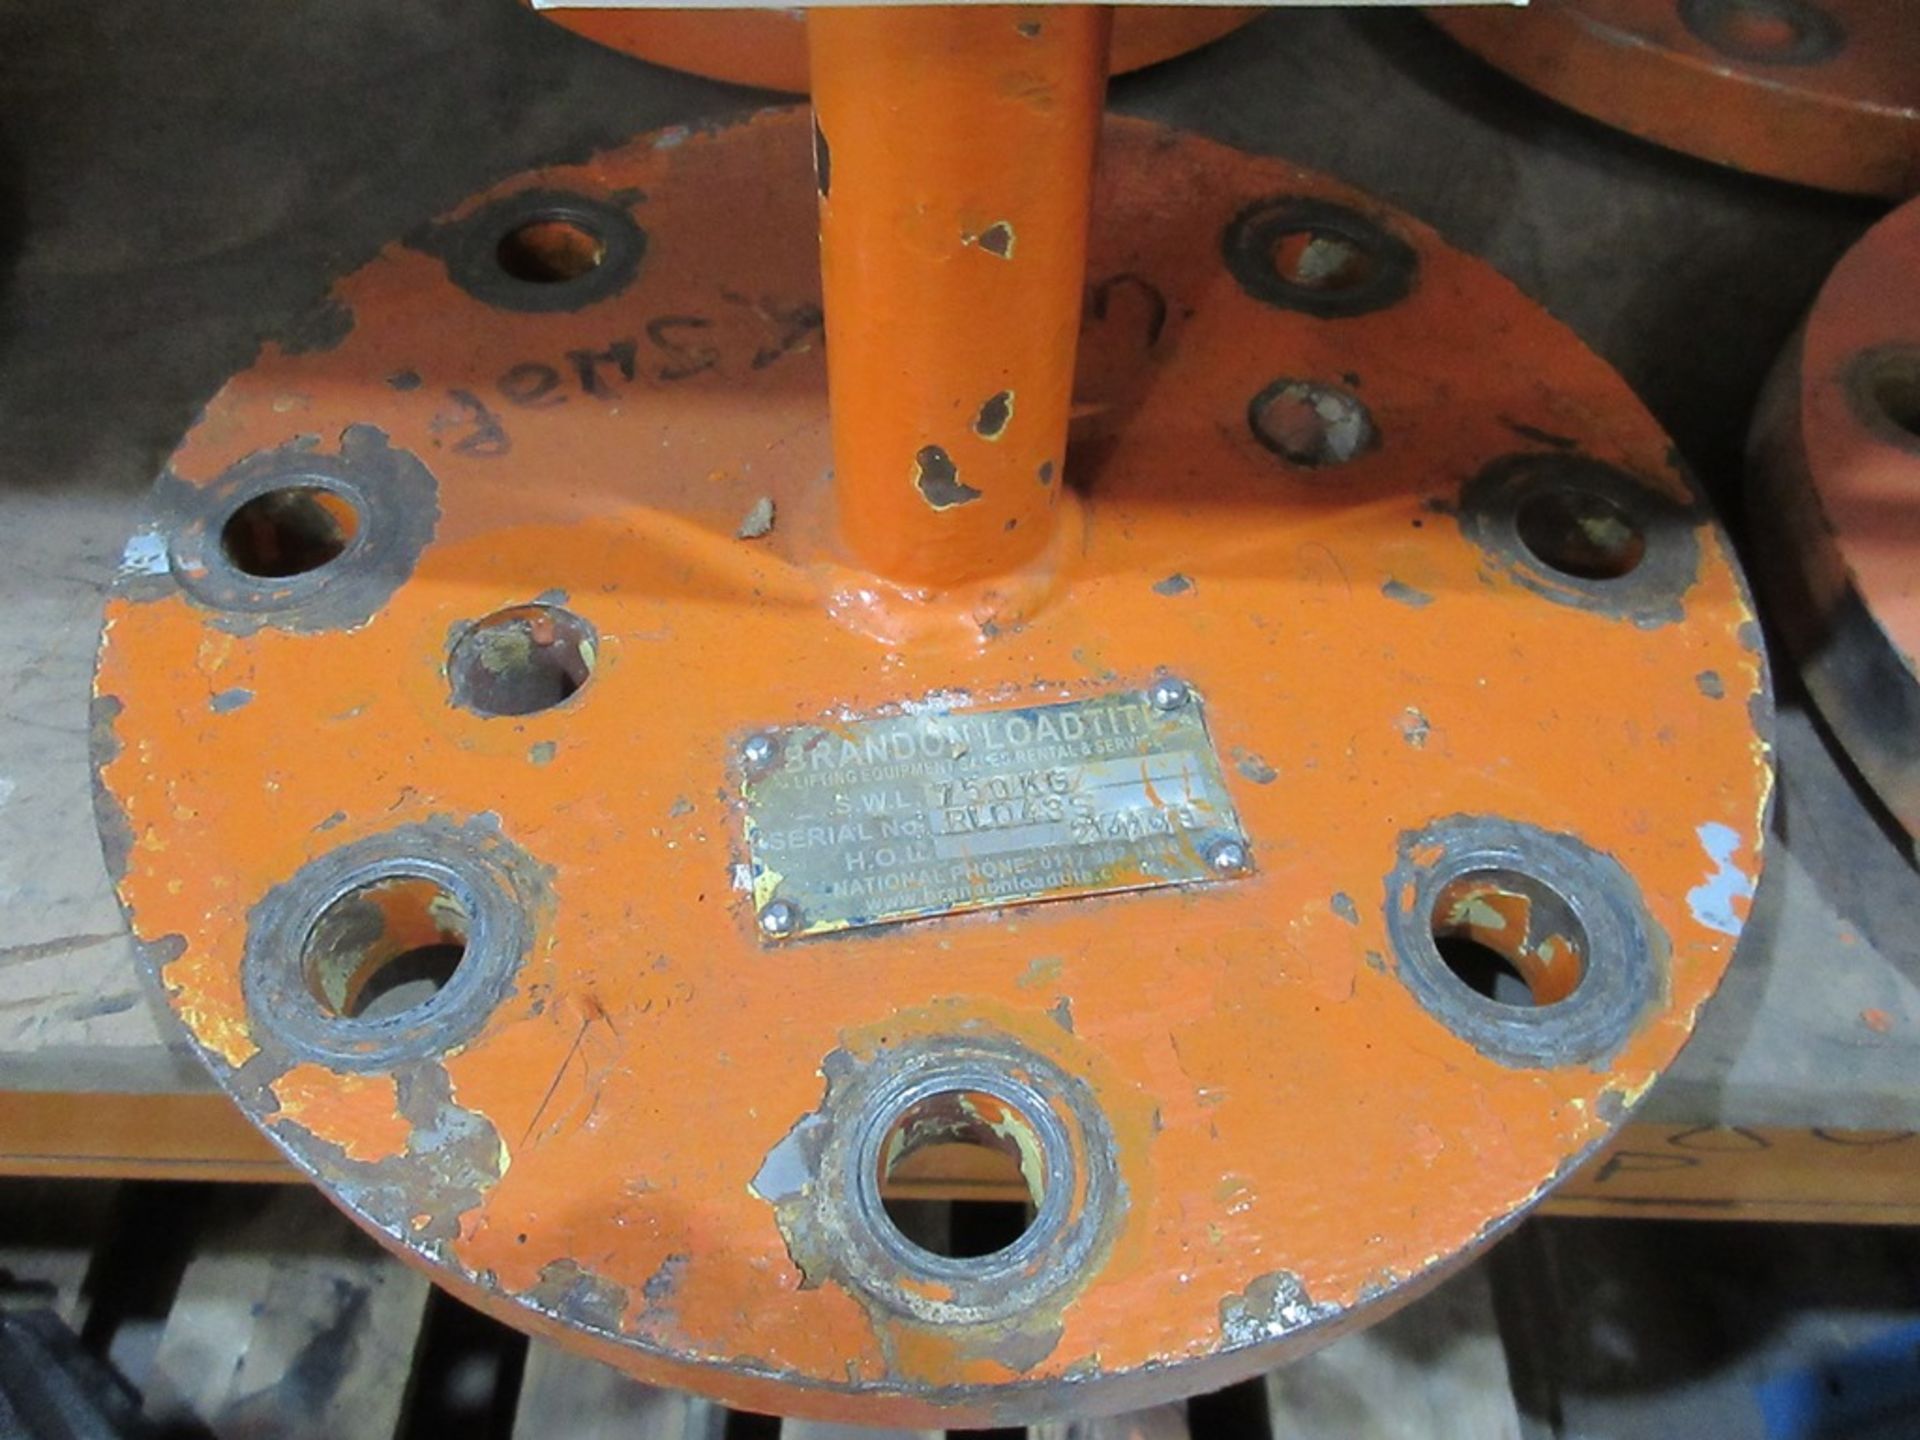 Six Brandon Loadtite 750kg lifting jigs NB: This item has no record of Thorough Examination. The - Image 2 of 4